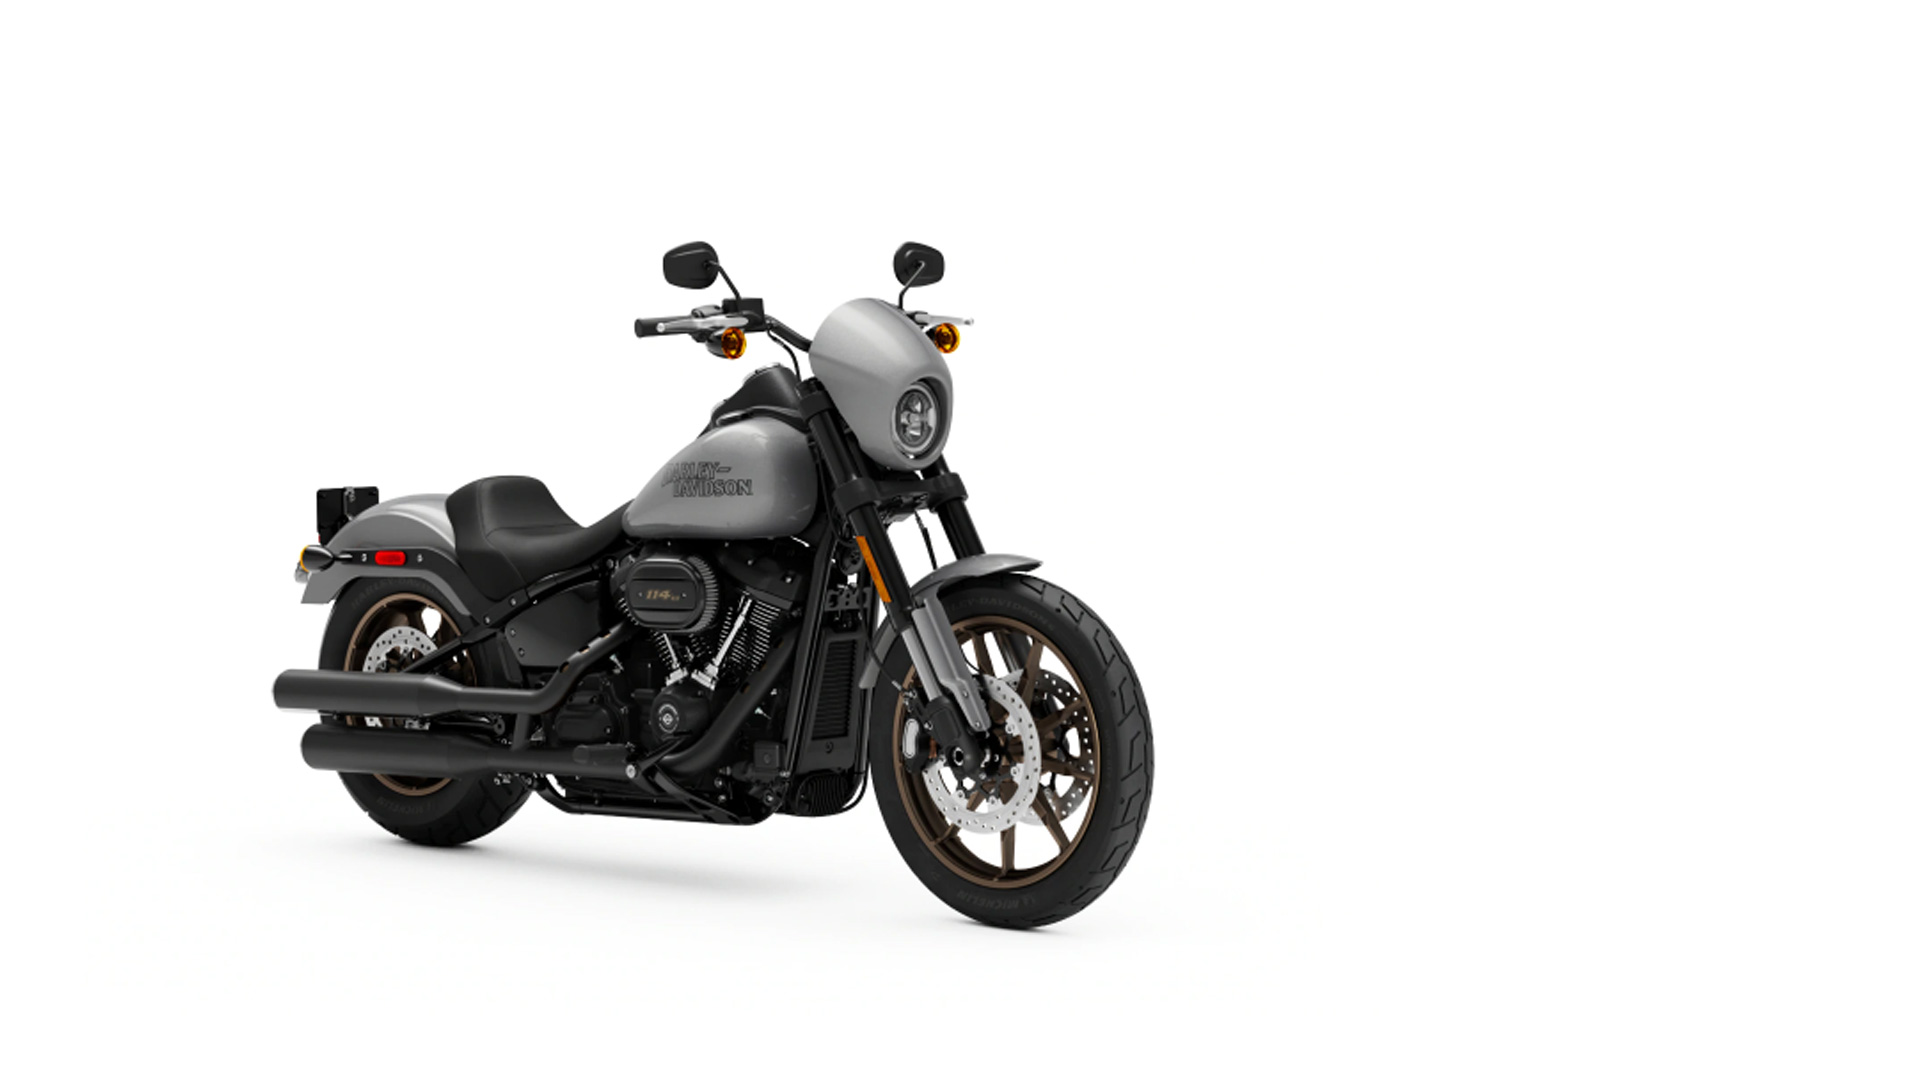 Harley Davidson Low Rider S 2020 Price Mileage Reviews Specification Gallery Overdrive